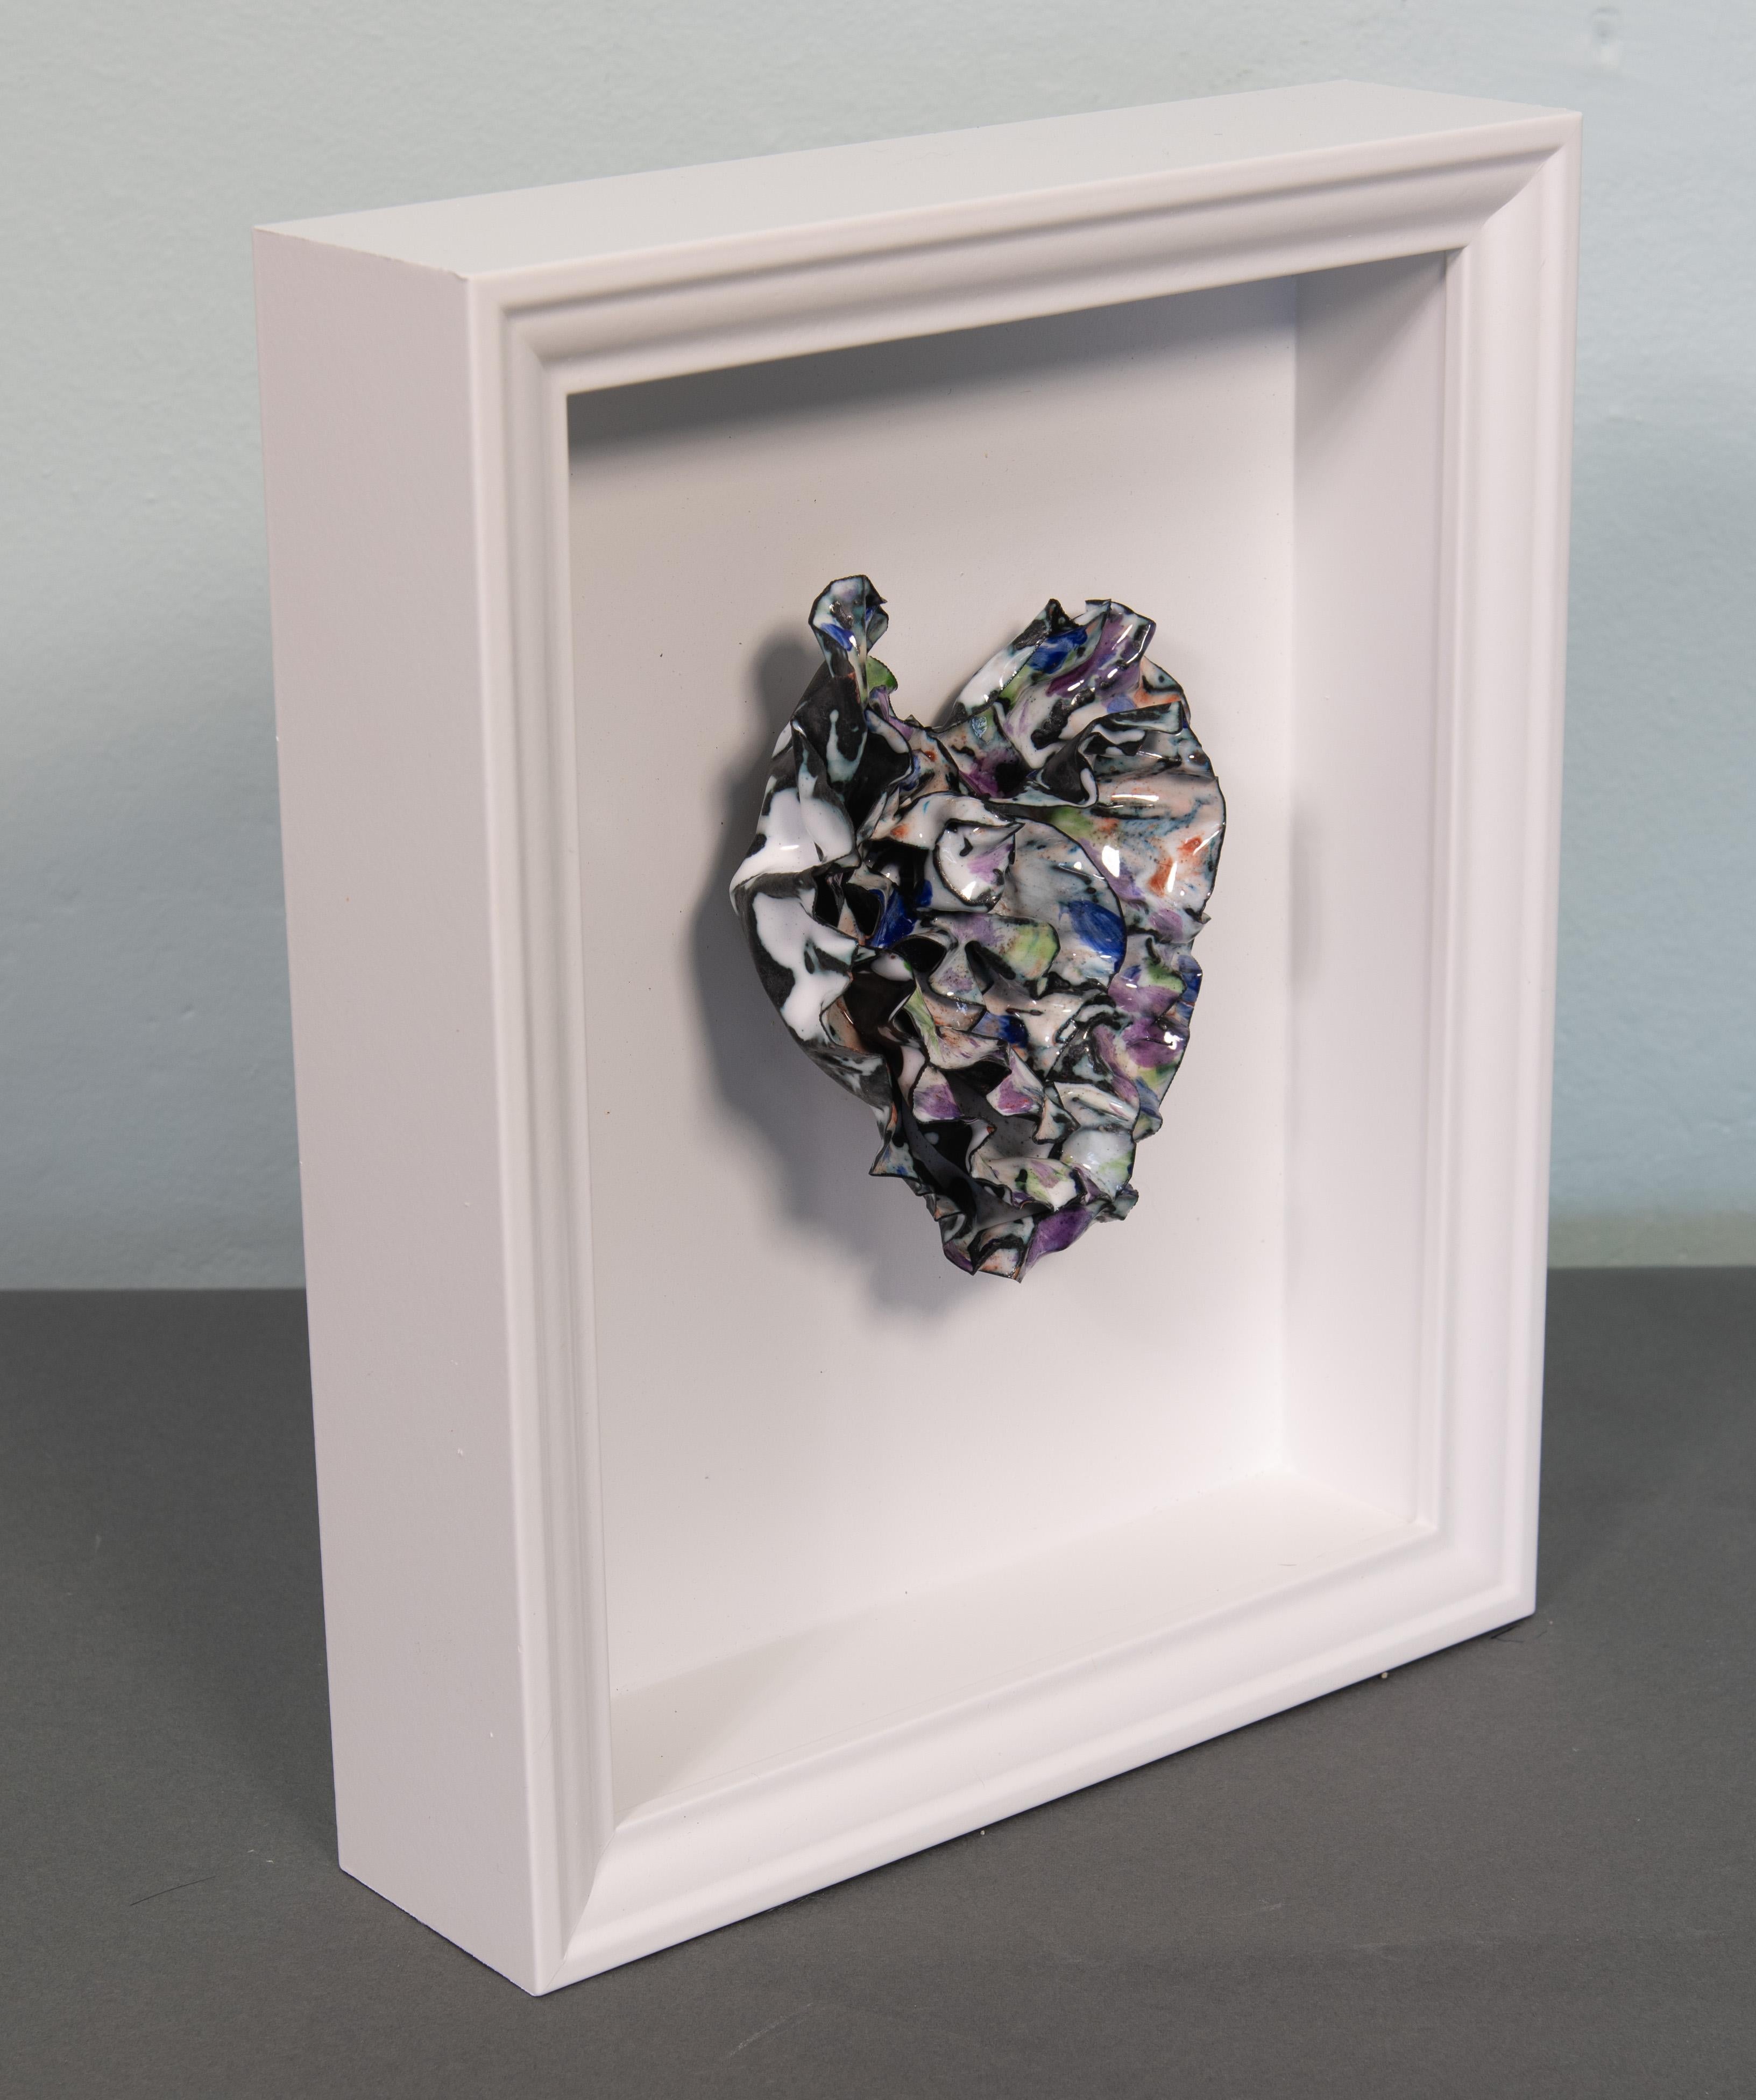 
Prismatic Heart, a captivating abstract enameled sculpture that embodies the vibrant colors of the rainbow in a dance of light and color. Sculpted by Sherry Been.
The 